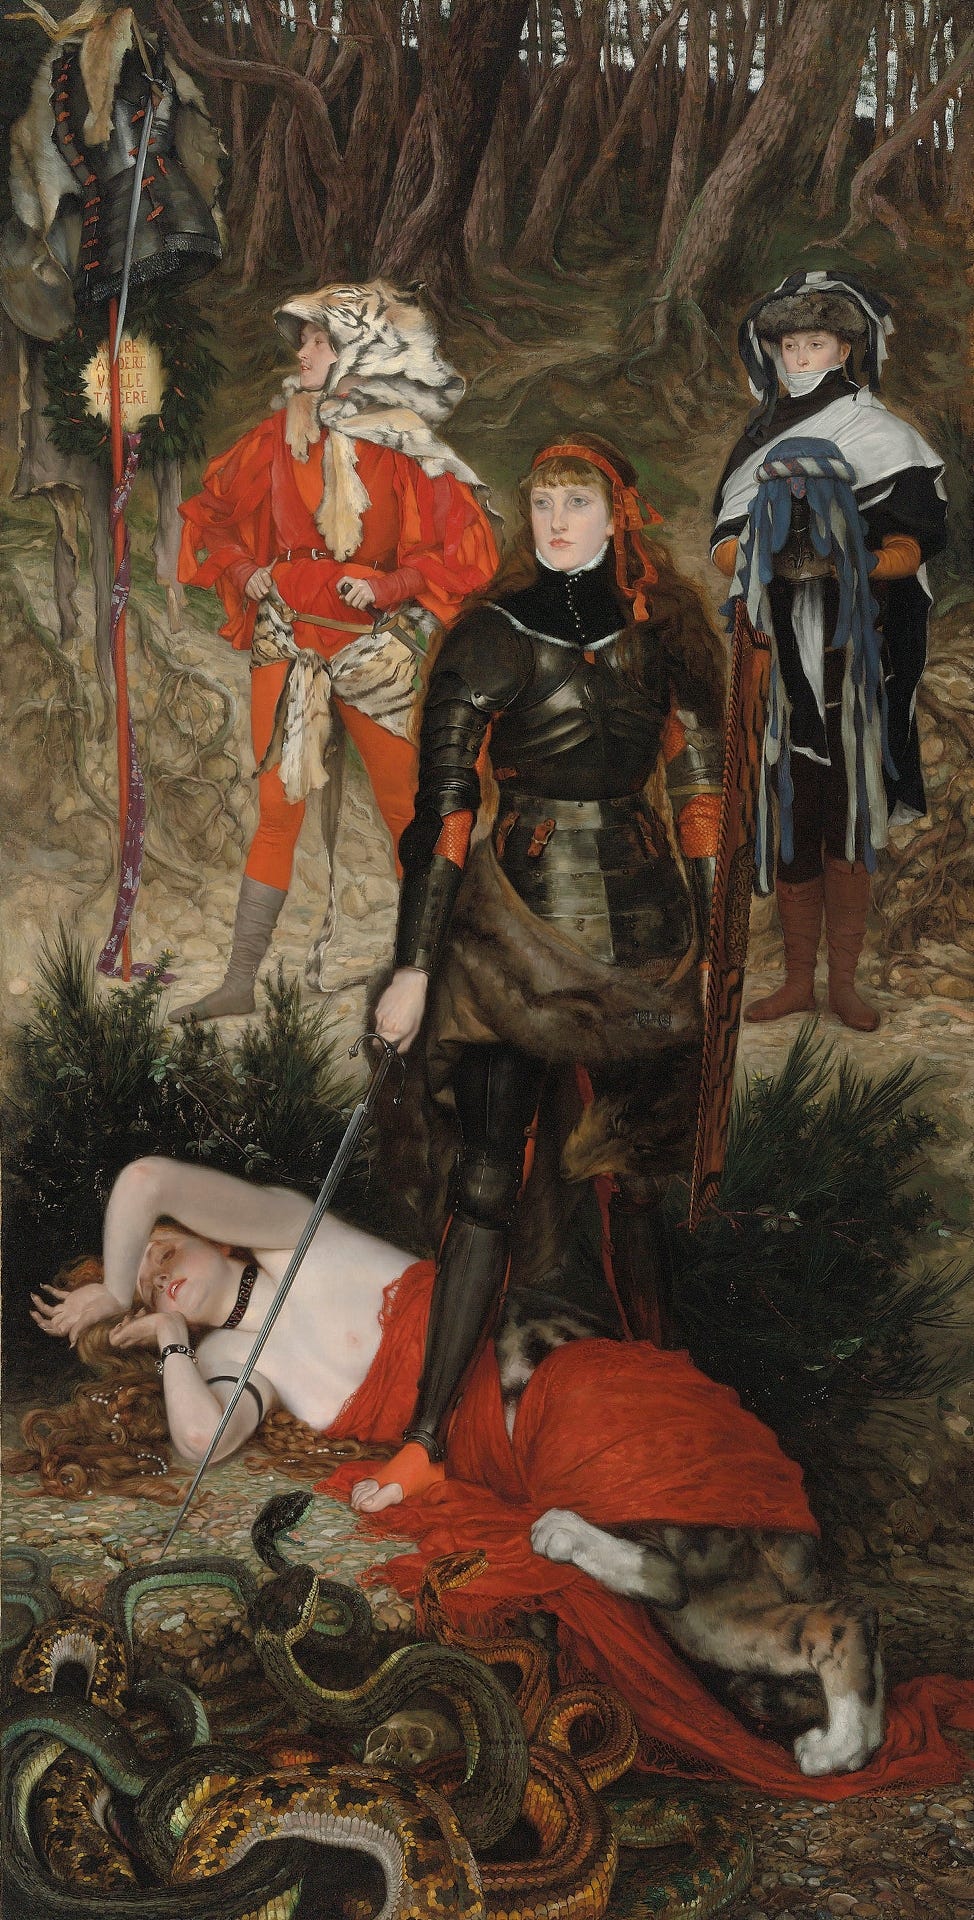 Triumph of the Will – The Challenge (circa 1877) by James Tissot